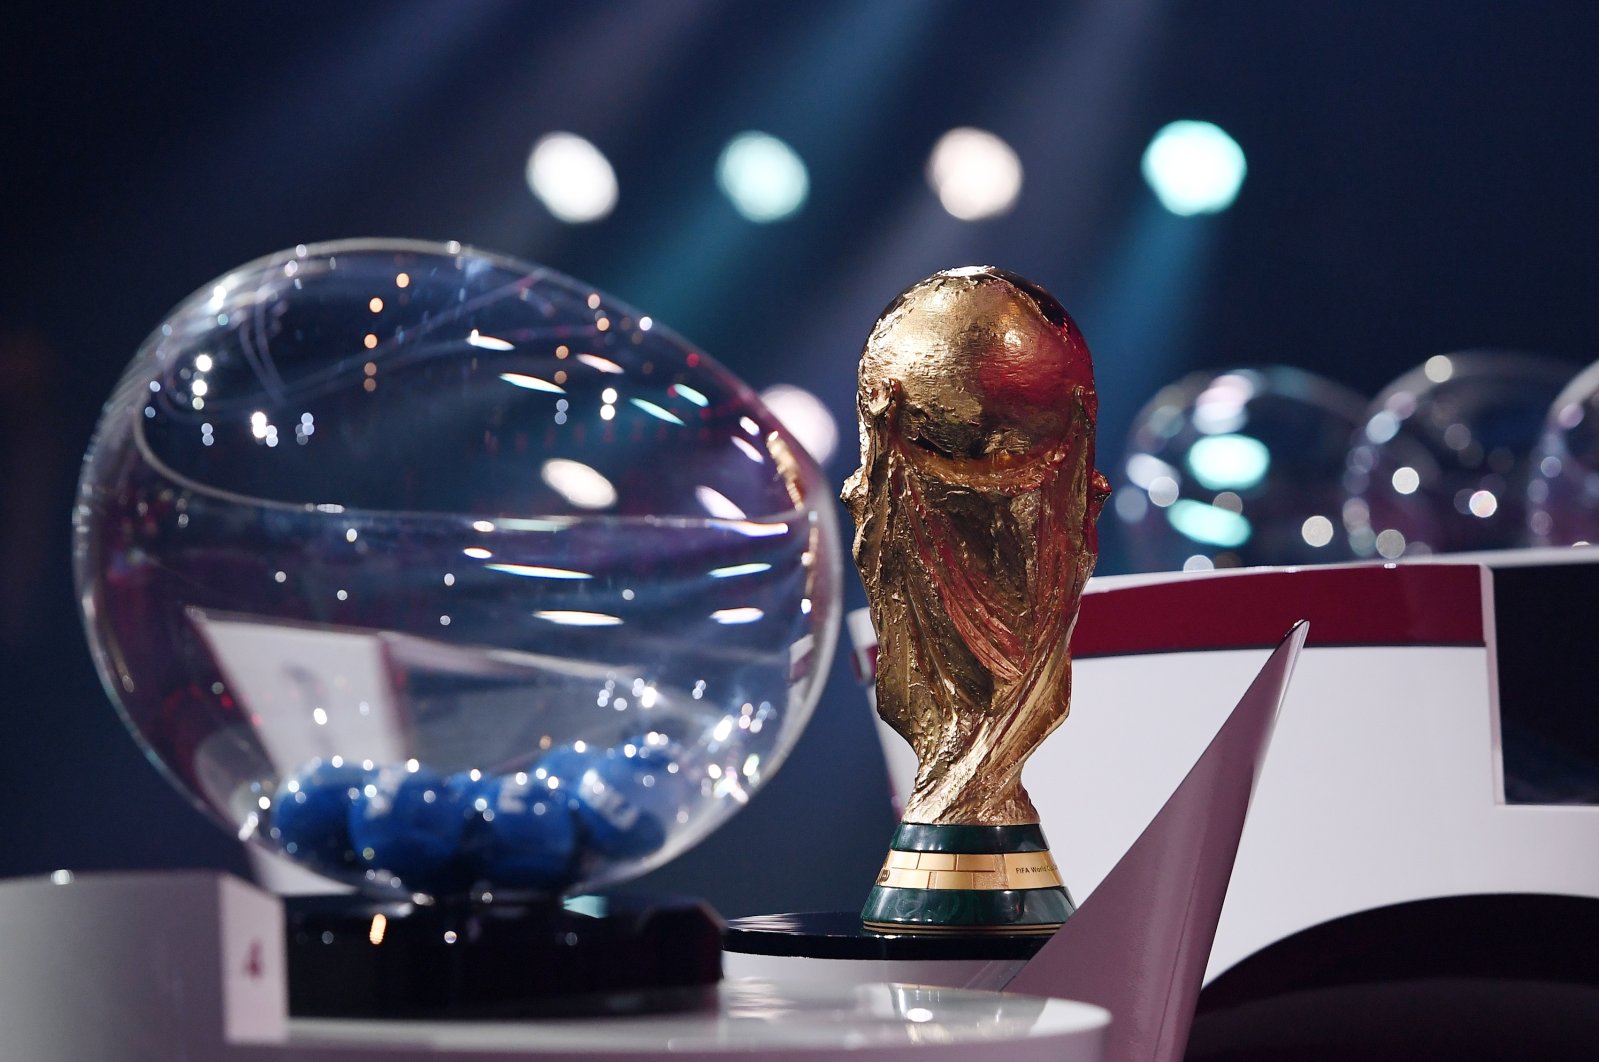 A handout photo made available by FIFA of the World Cup Trophy during the UEFA preliminary draw for the FIFA World Cup 2022 in Zurich, Switzerland, Dec. 7, 2020. (EPA Photo)